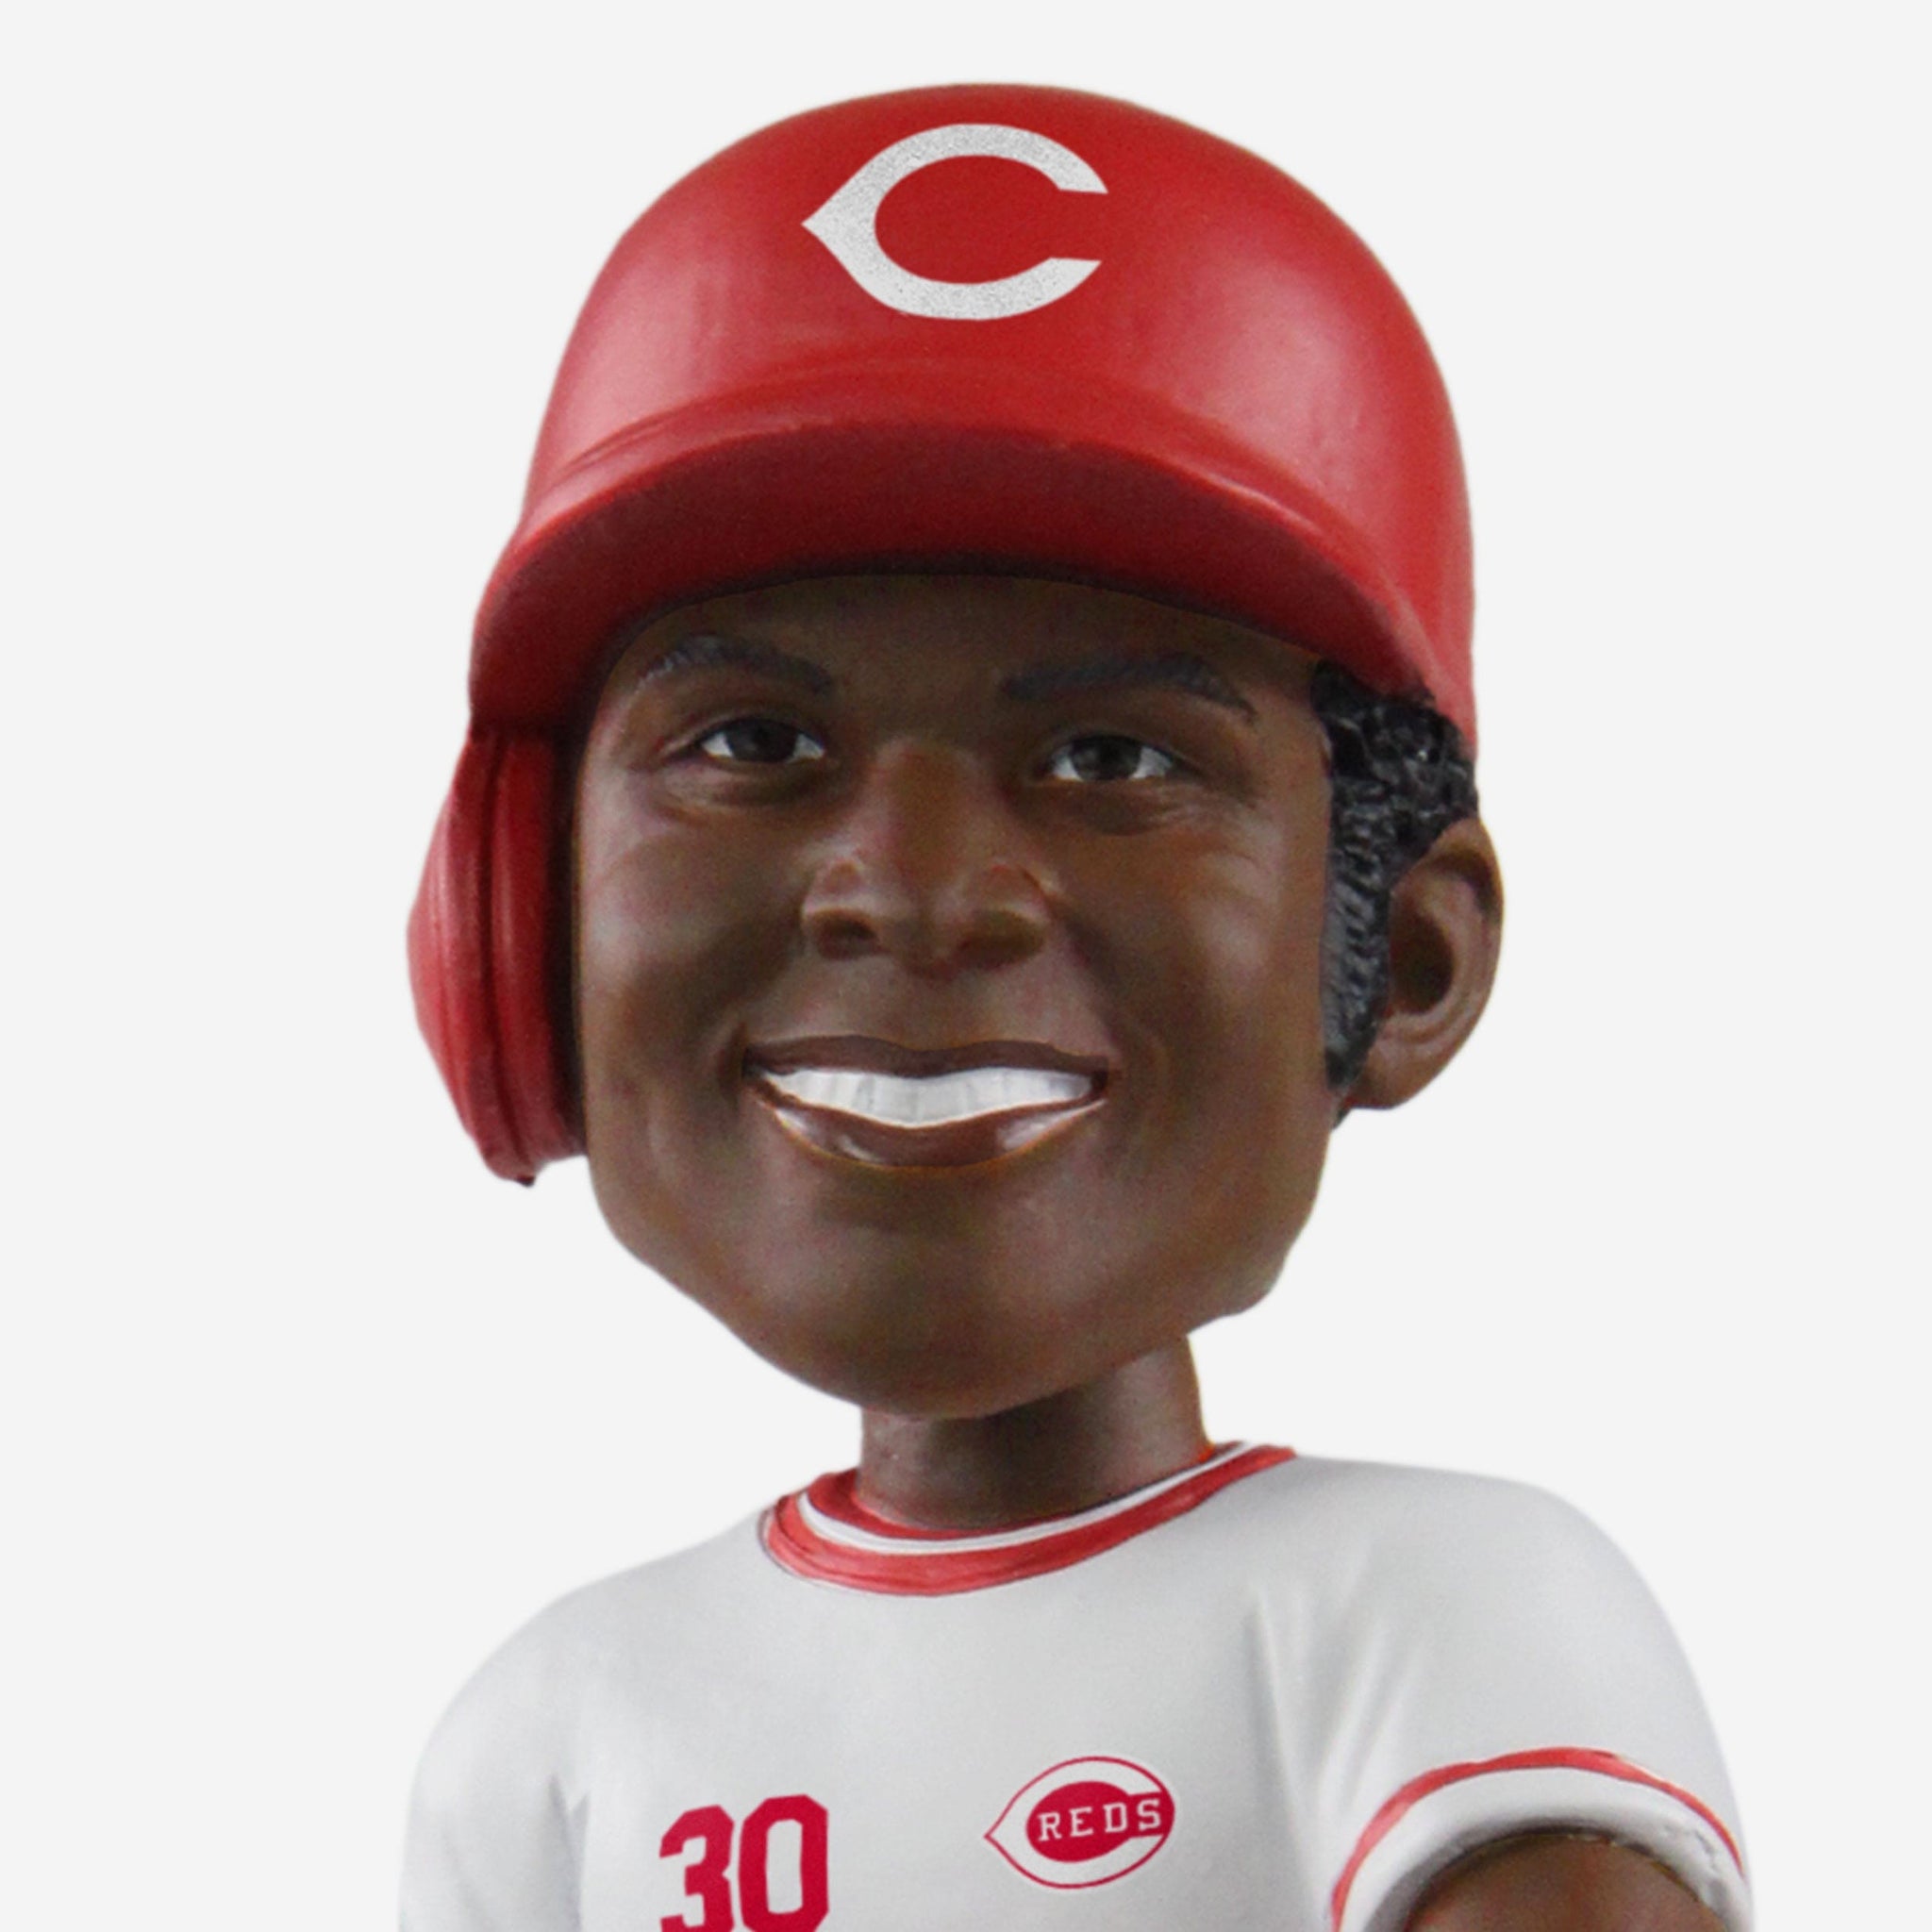 Reds Baseball Hall of Fame Vintage Retro Bobblehead at 's Sports  Collectibles Store